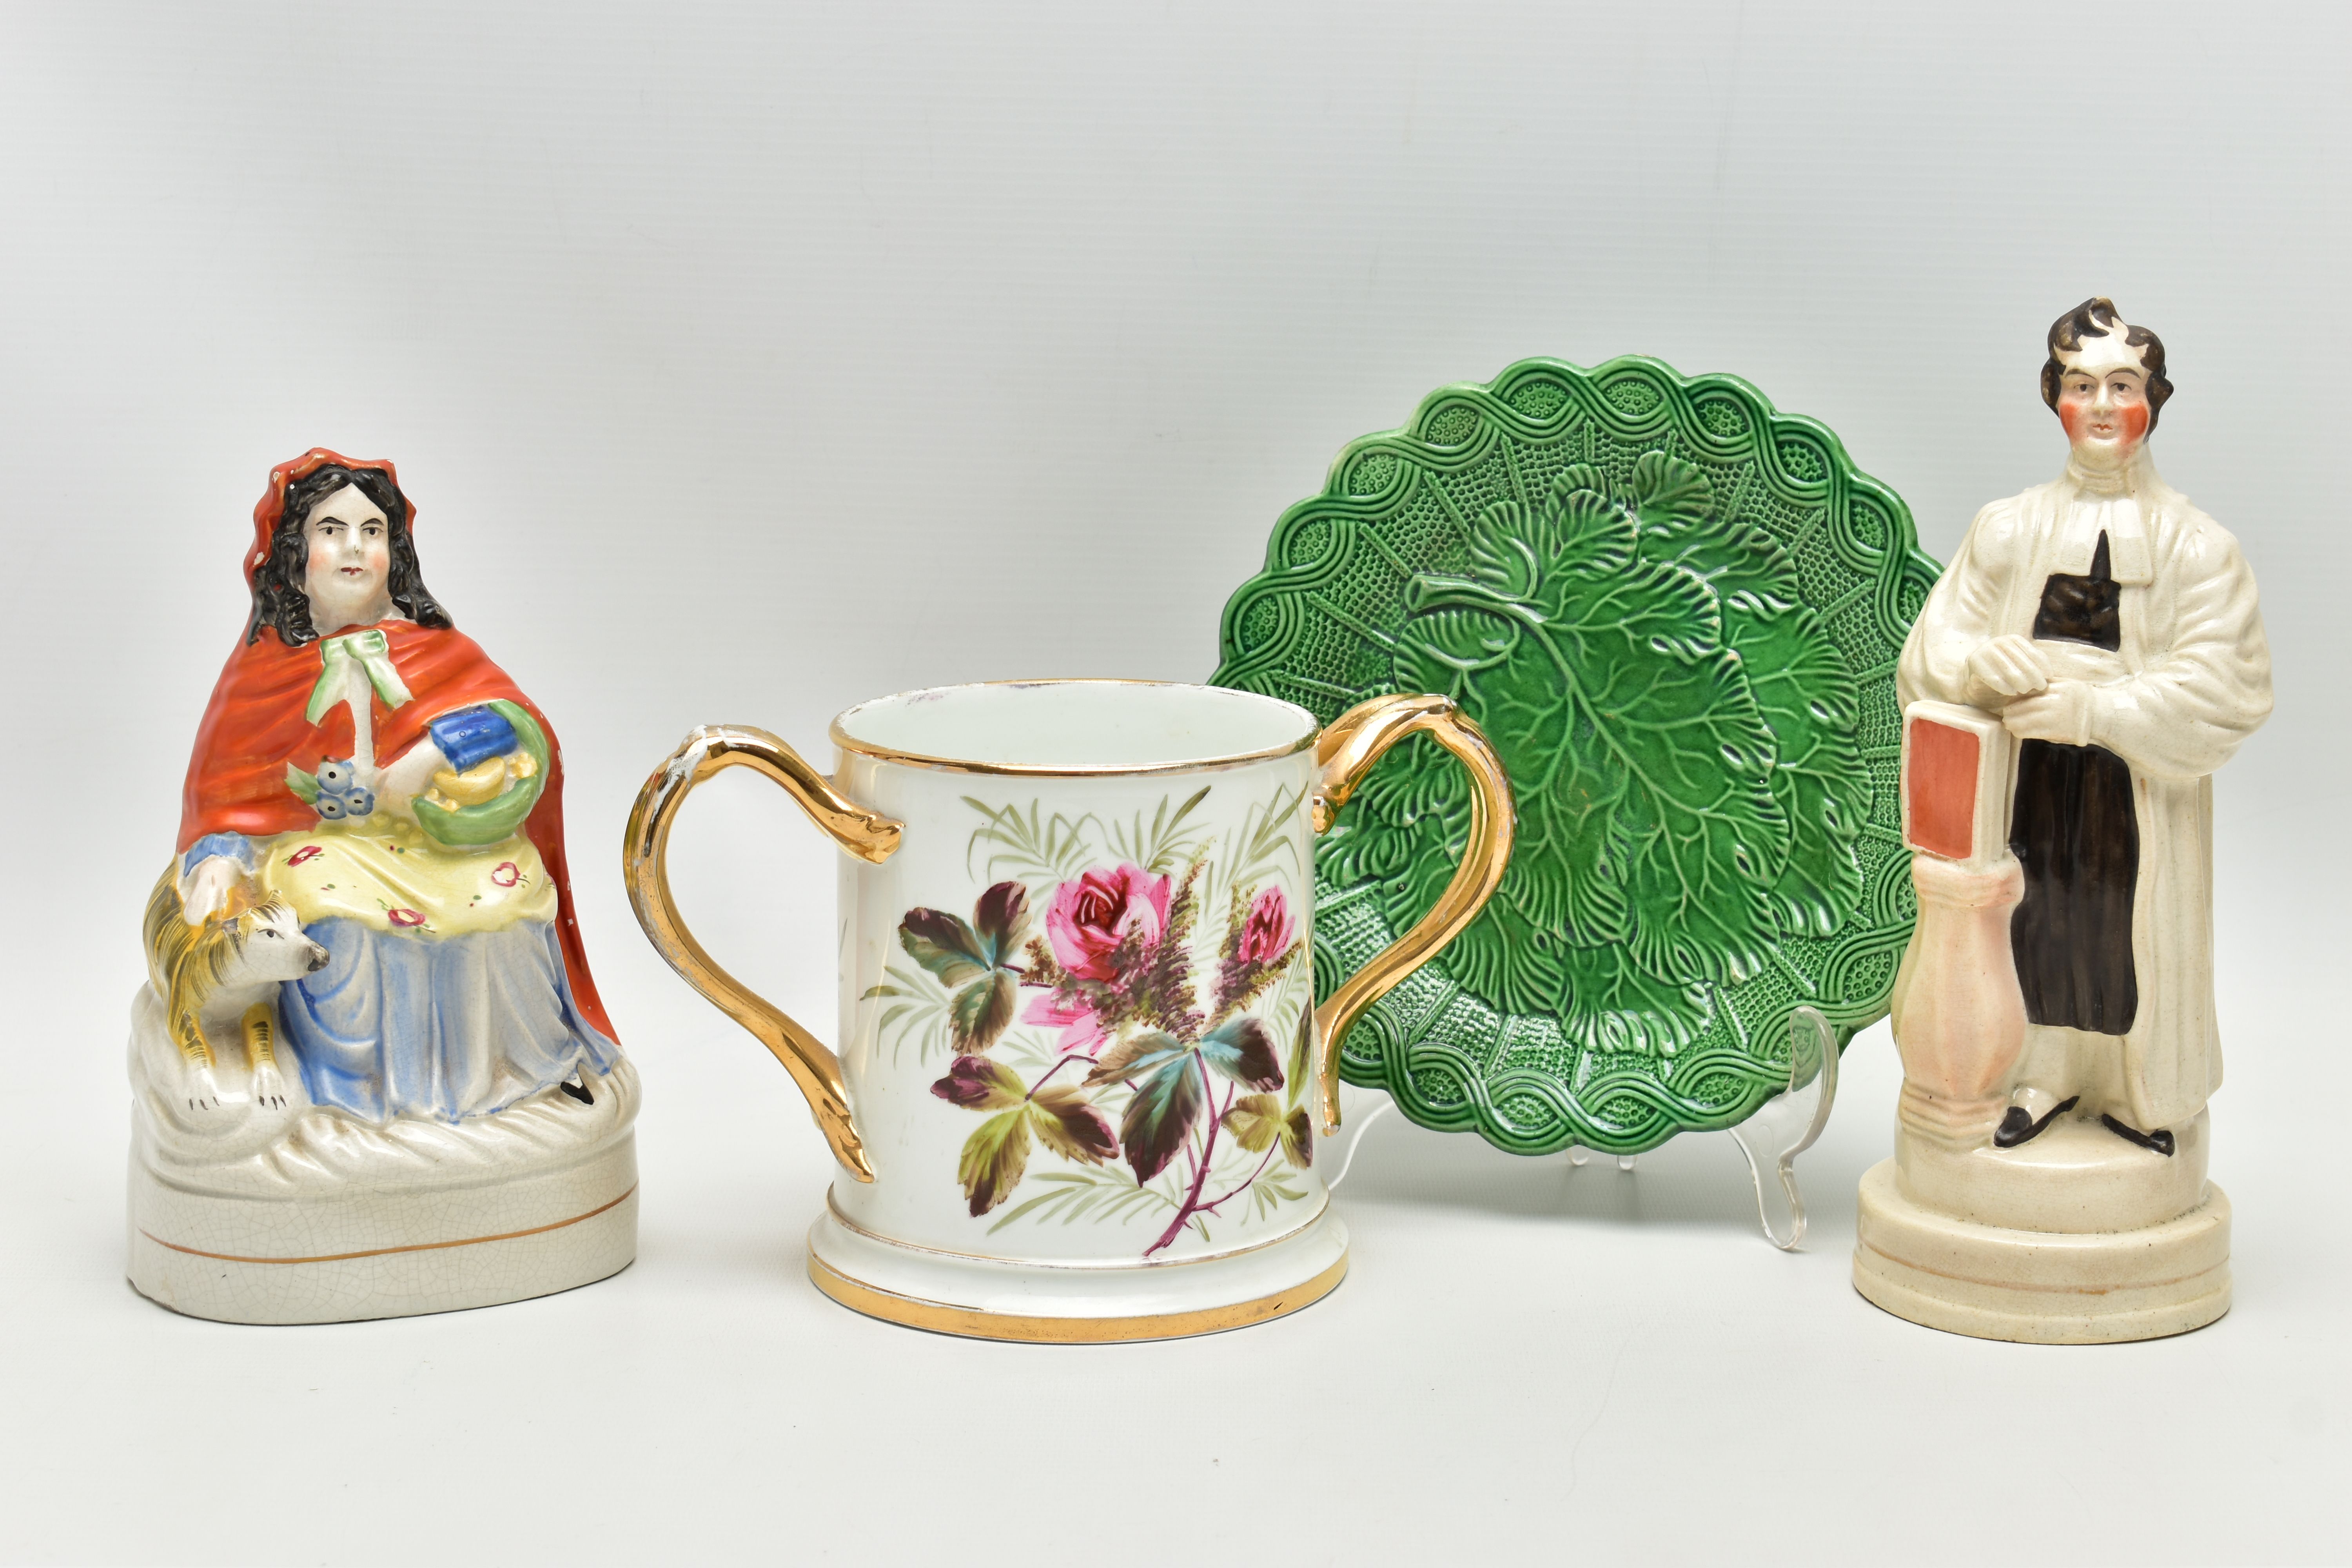 TWO VICTORIAN STAFFORDSHIRE POTTERY FIGURES AND TWO OTHER VICTORIAN CERAMIC ITEMS, comprising a